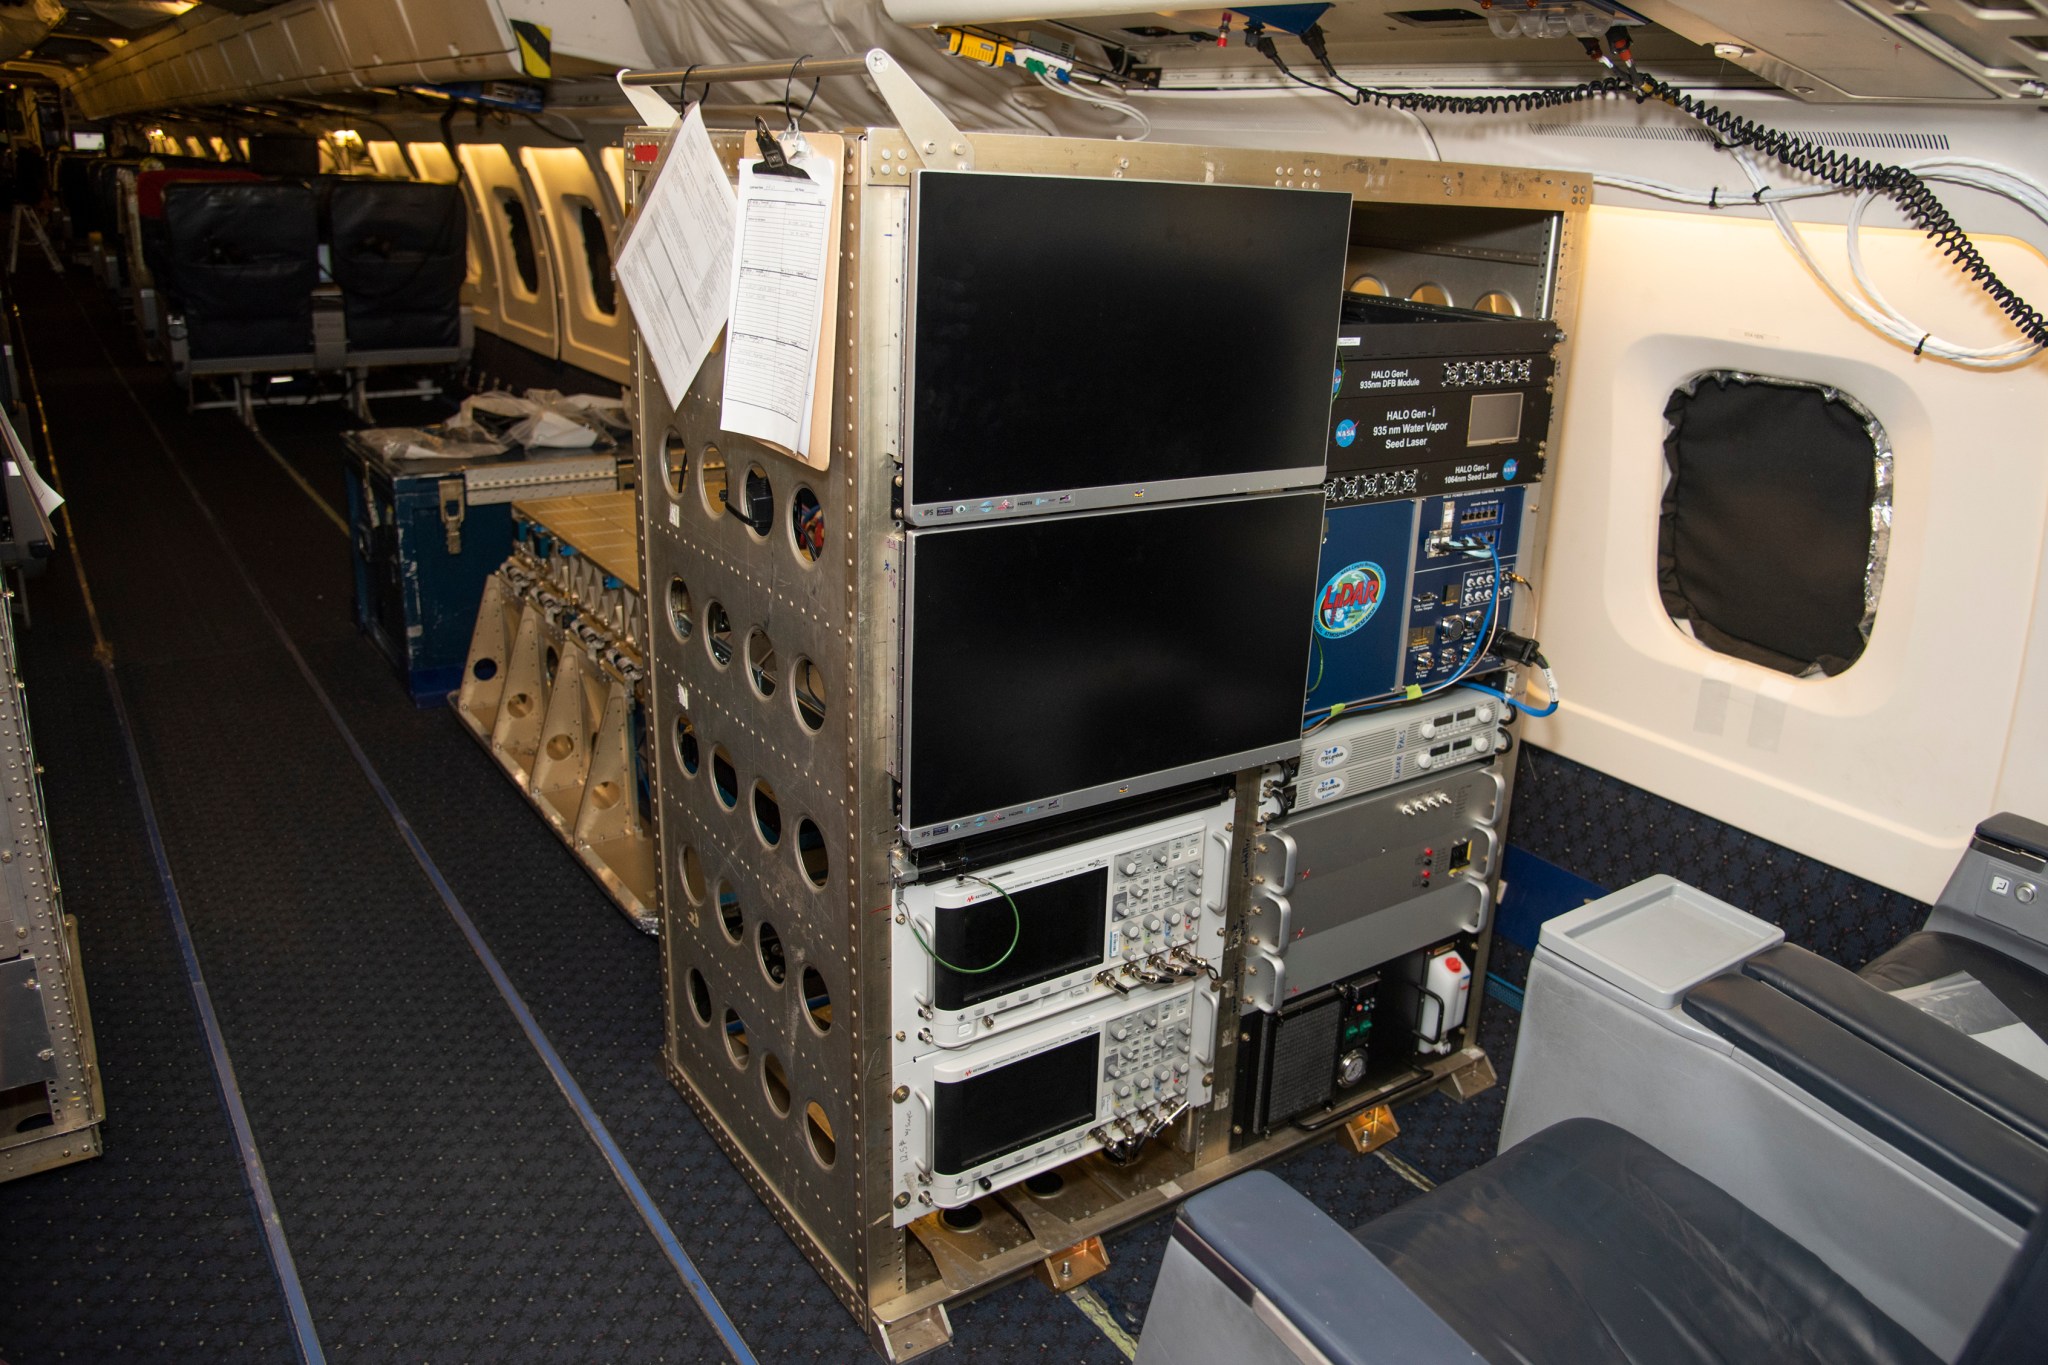 The High Altitude Lidar Observatory (HALO), which has a metal frame housing two computer monitors and other electronic equipment. The whole frame is bolted to the floor of a research plane.